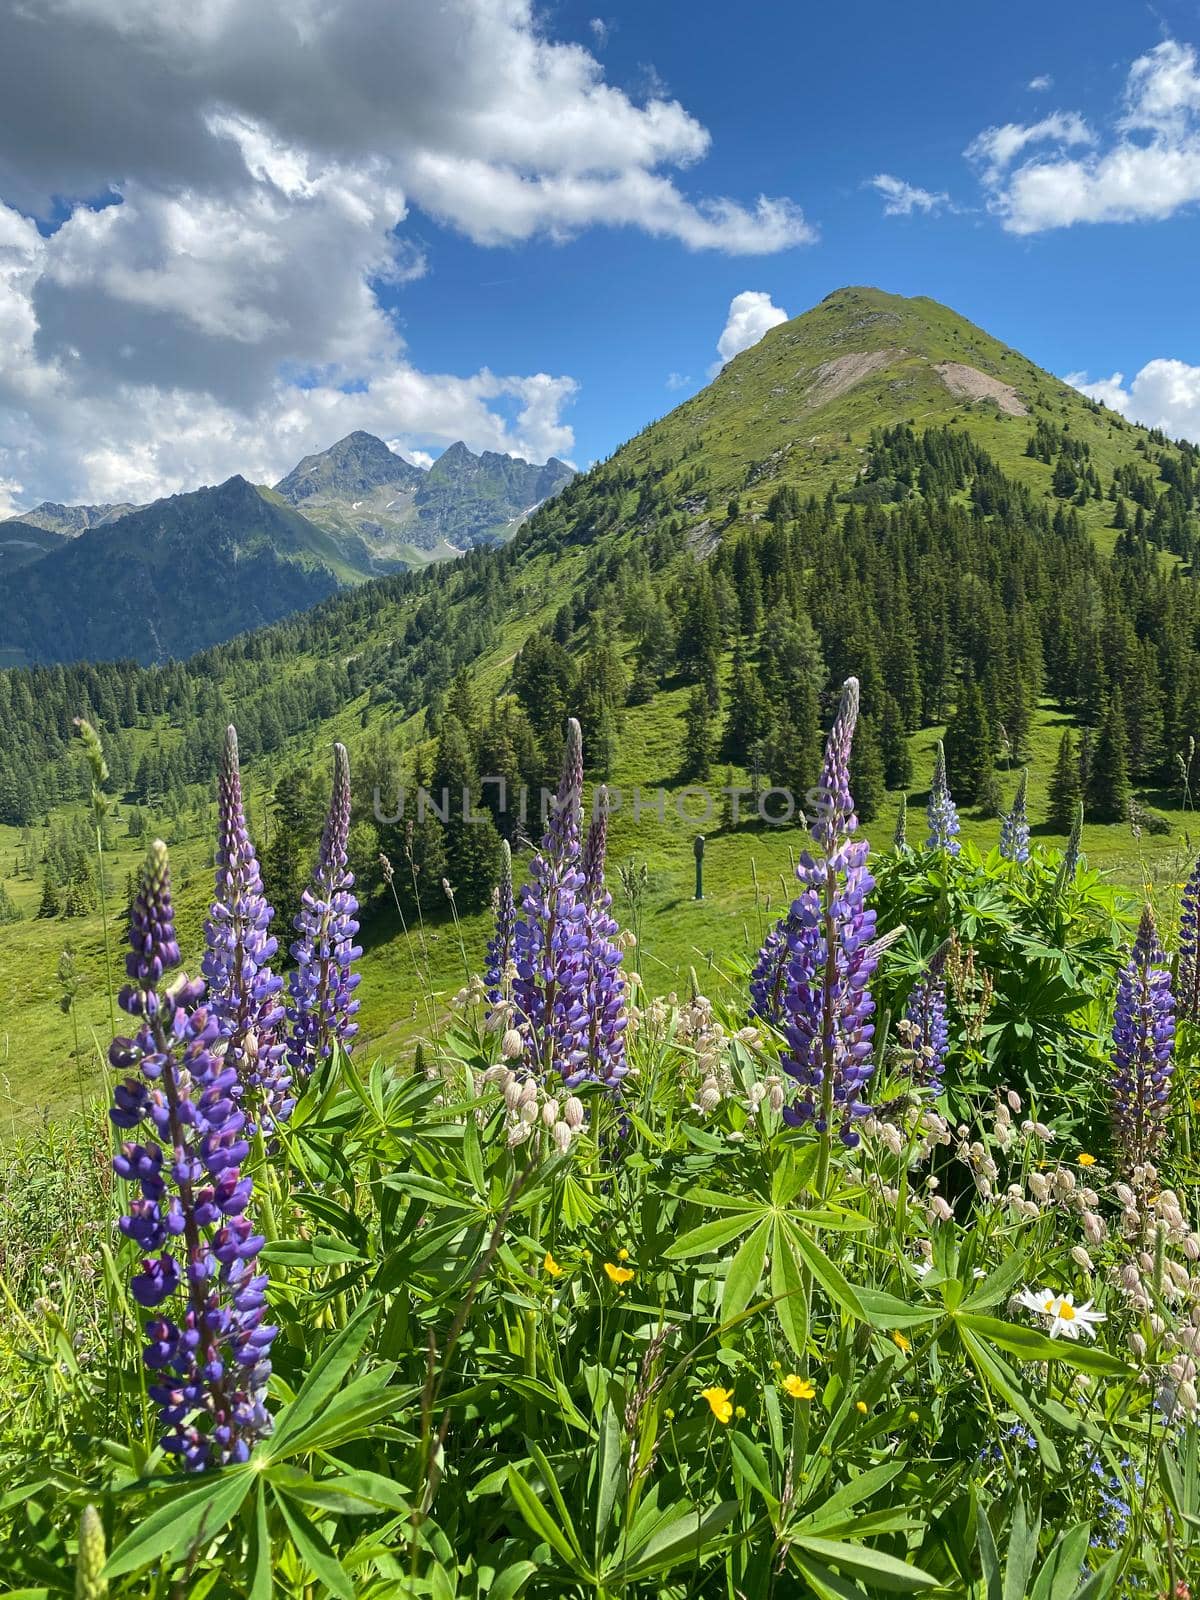 Summer scenery near the Krahbergzinken mountain, Austria. Krahbergzinken is a mountain situated west of Untertal valley and south-east of Schladming.